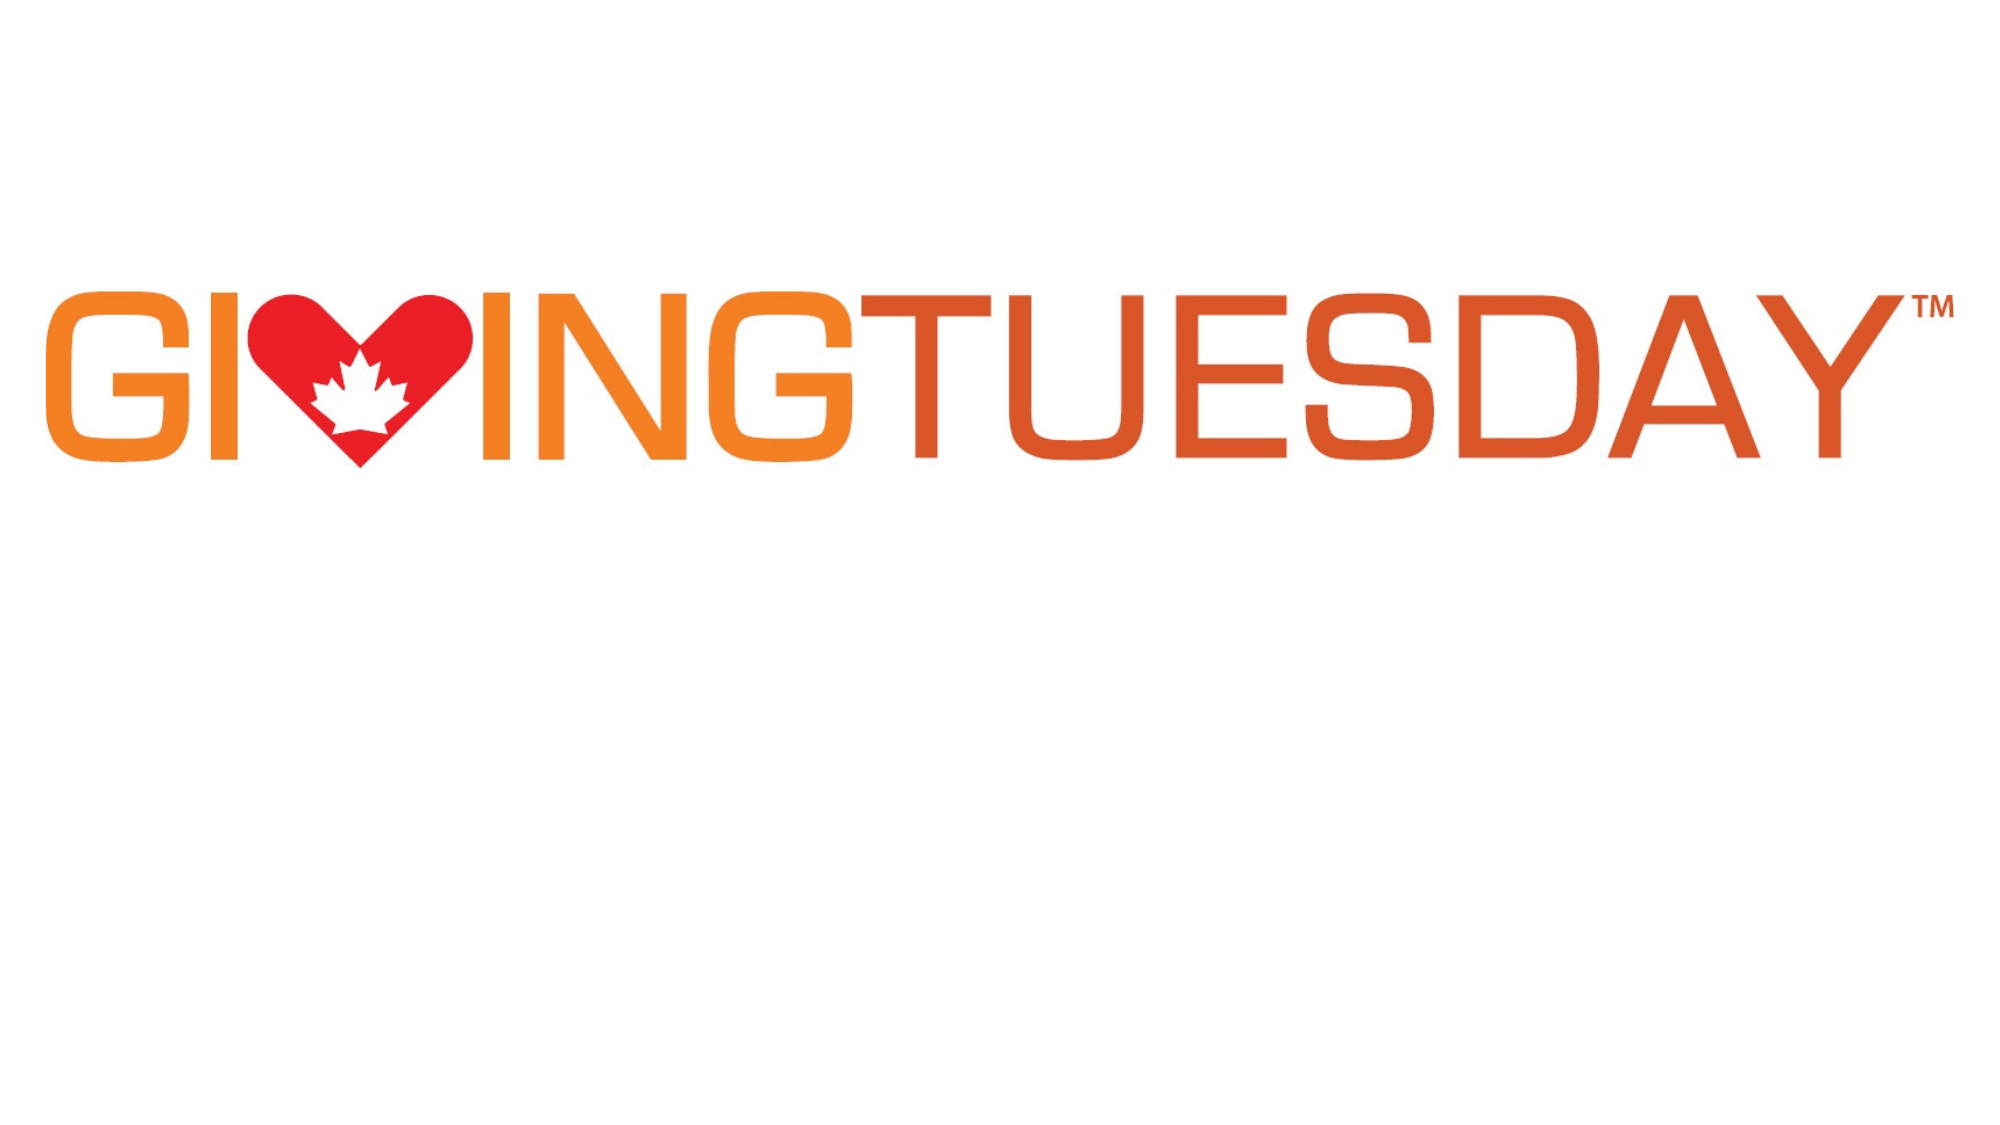 Make a donation to Giving Tuesday!